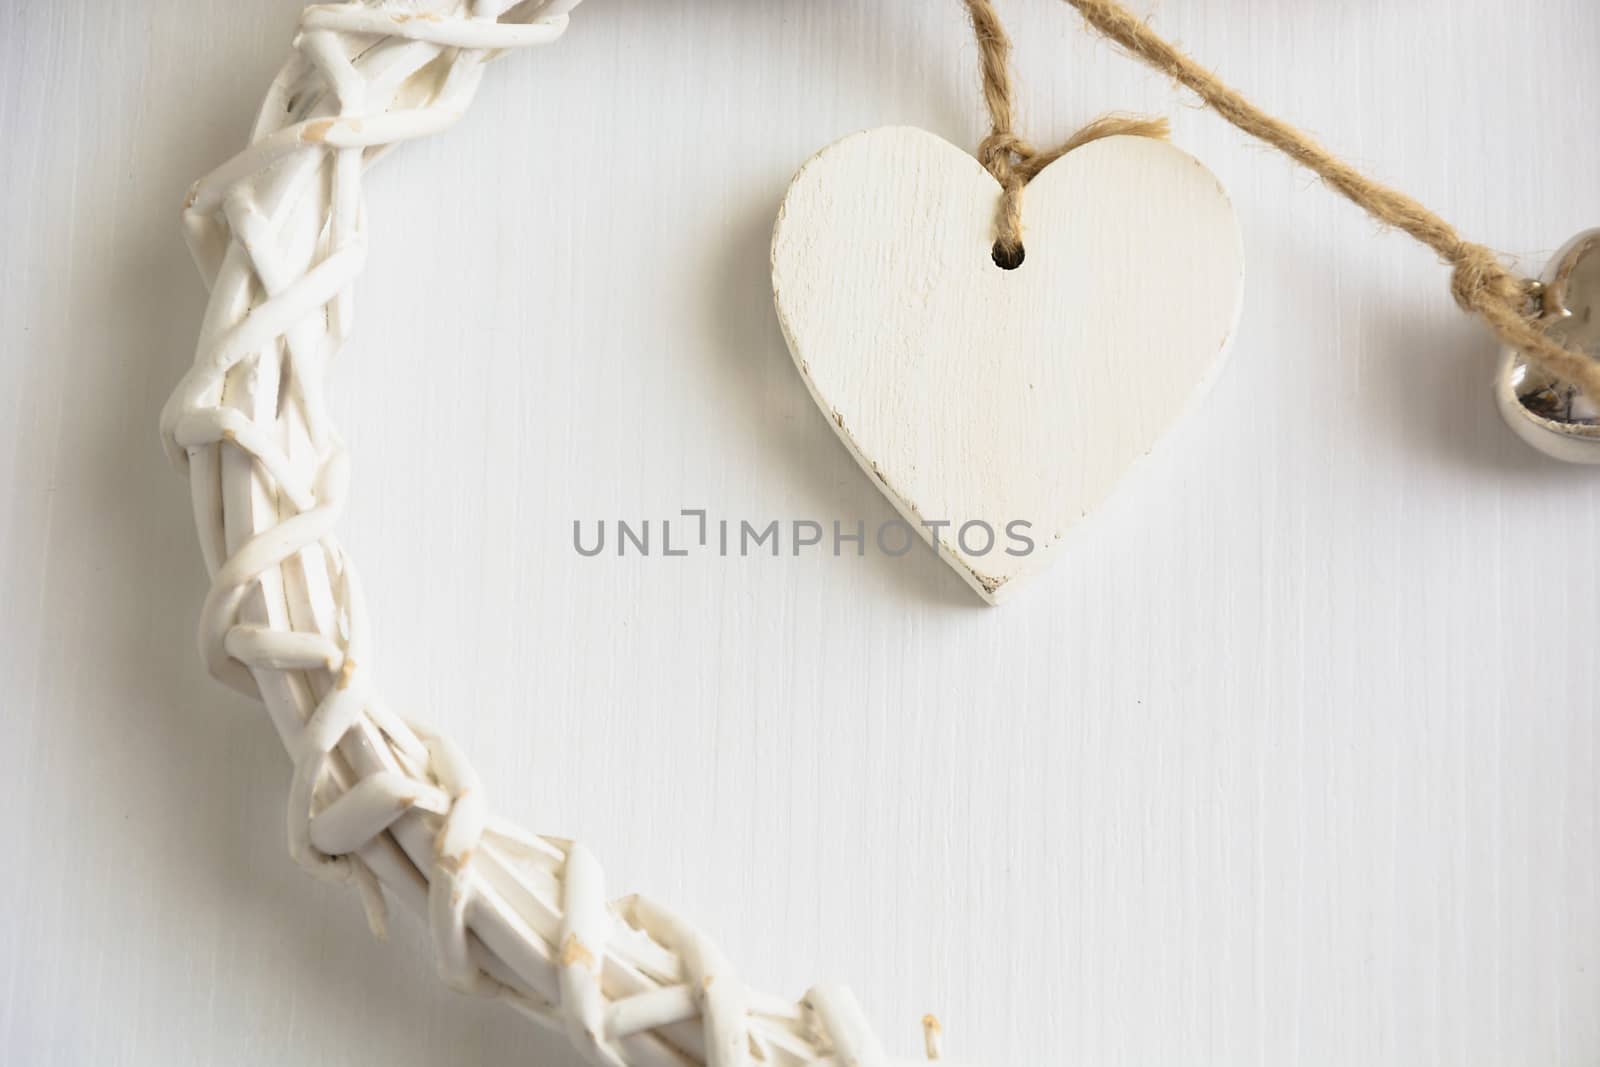 Two wooden hearts placed nicely on a white wood background